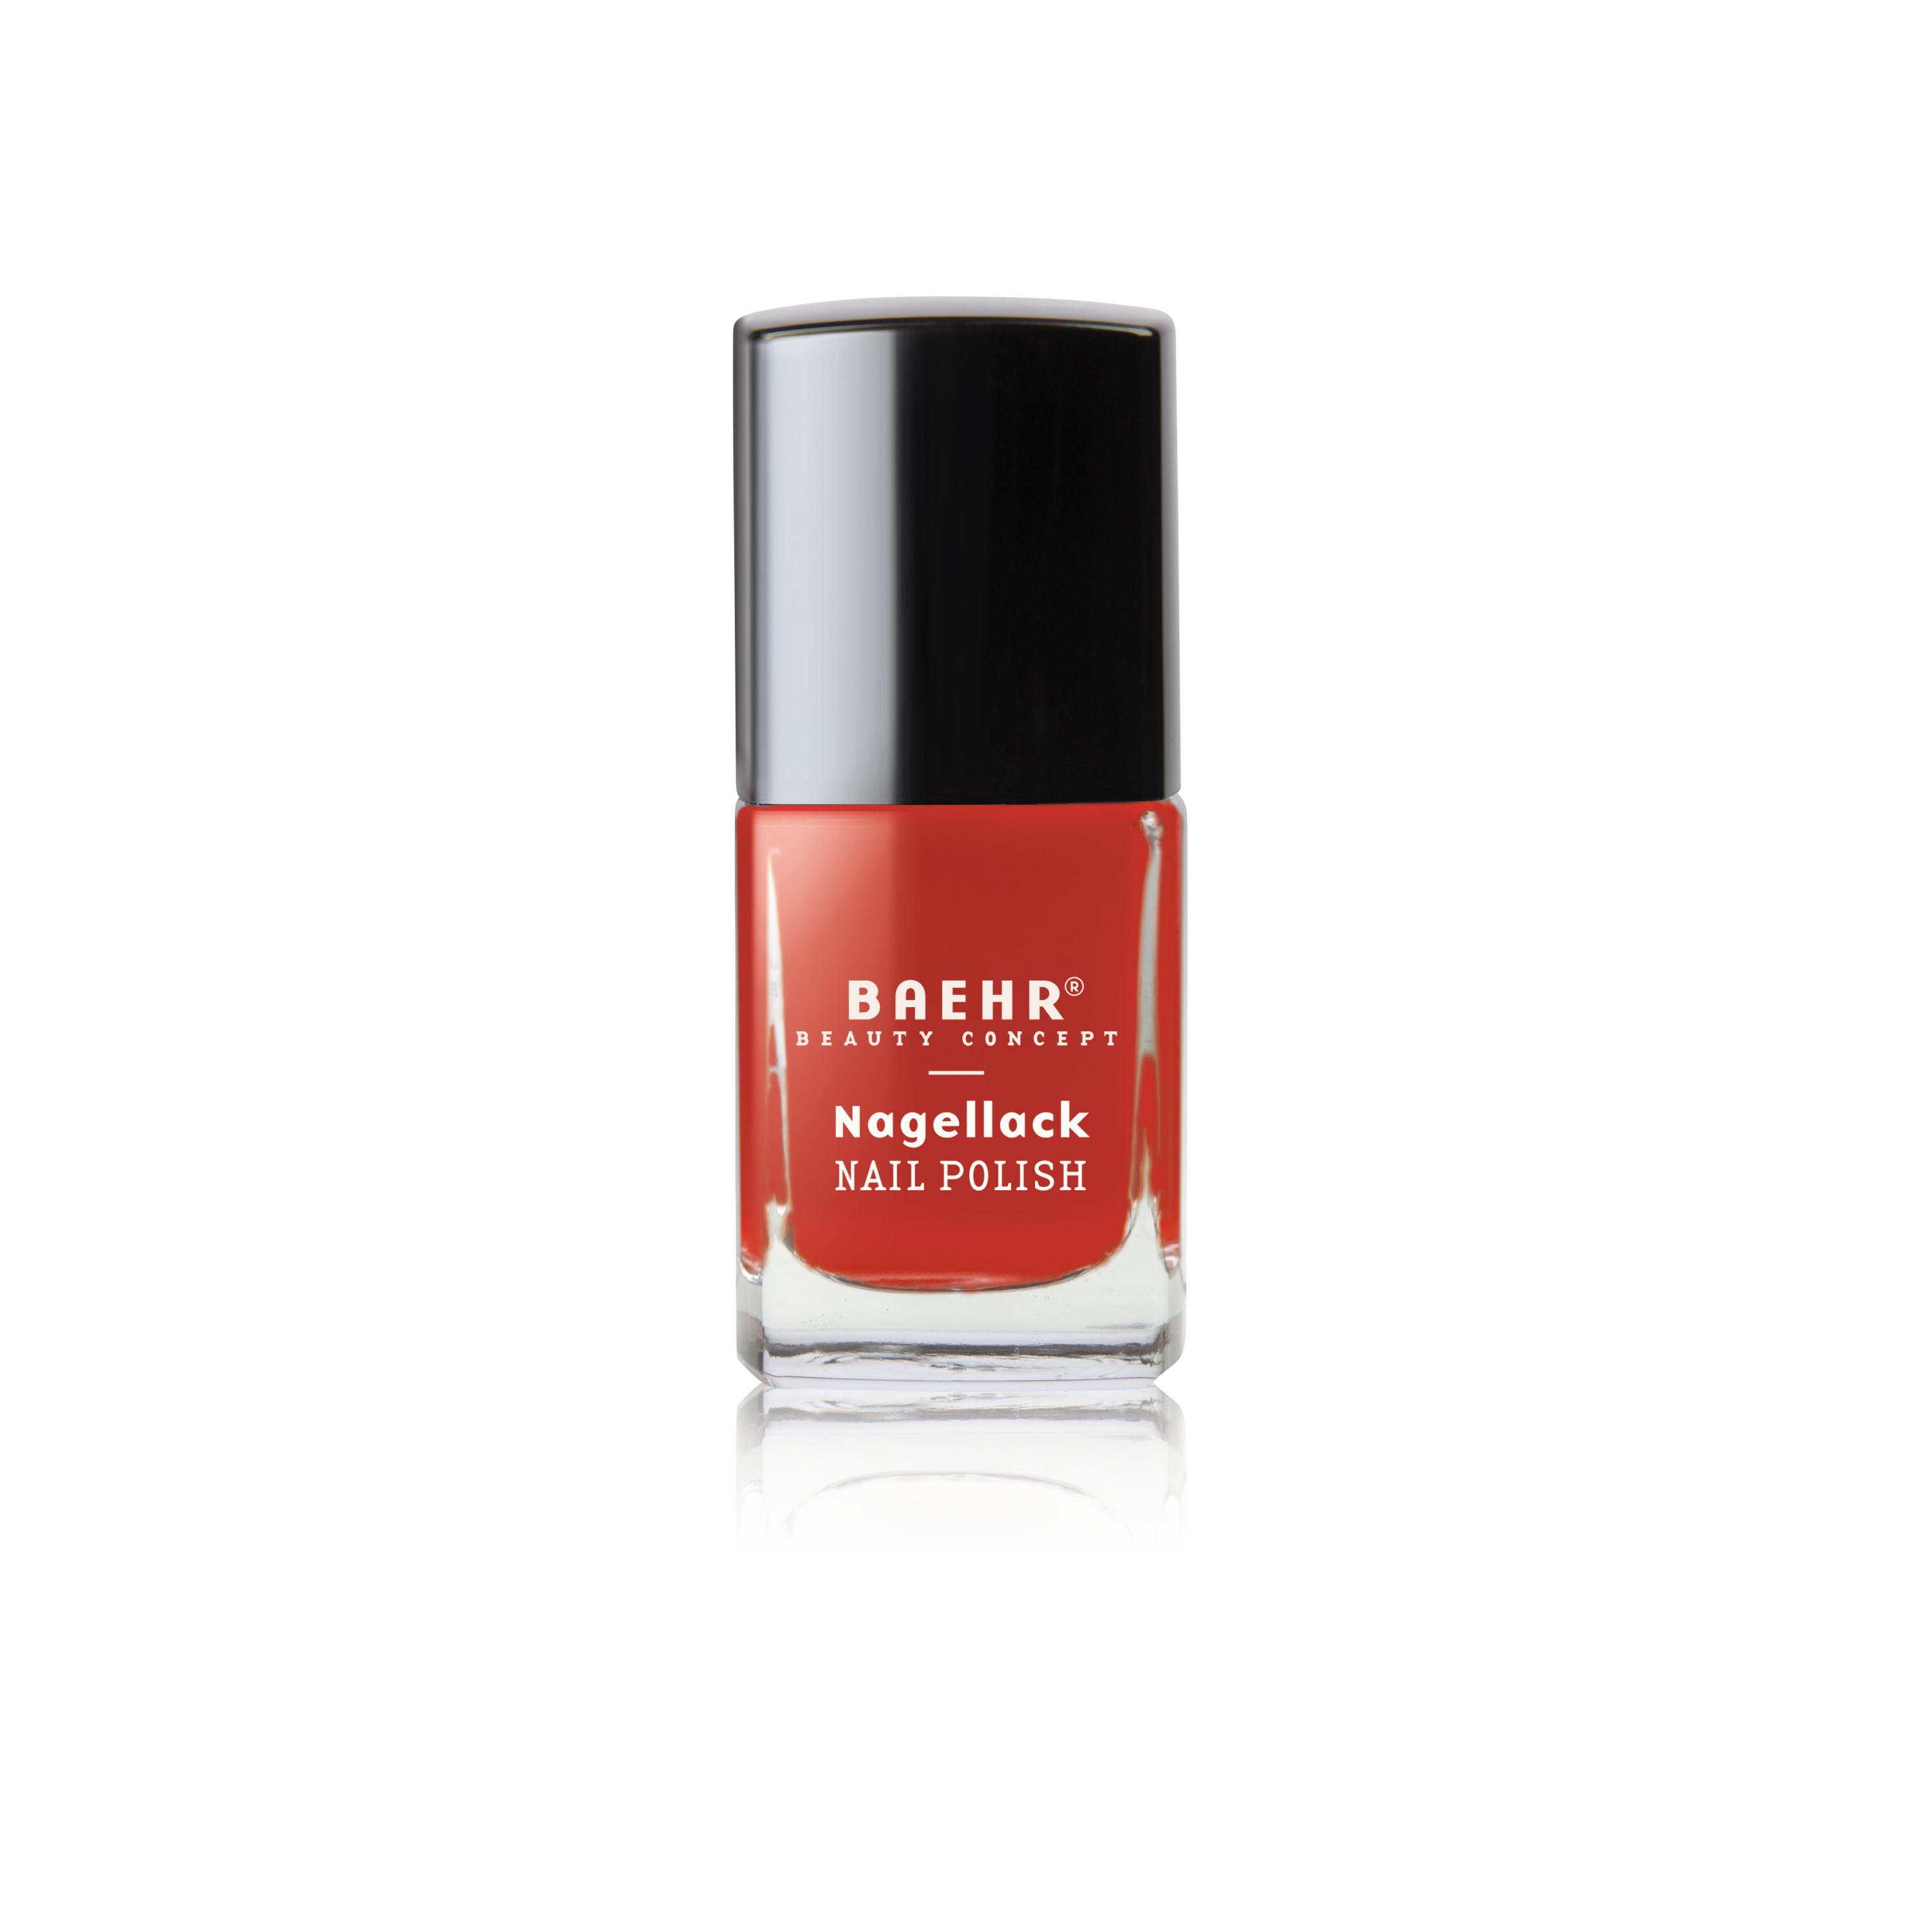 BAEHR BEAUTY CONCEPT - NAILS Nagellack sunglow red 11 ml